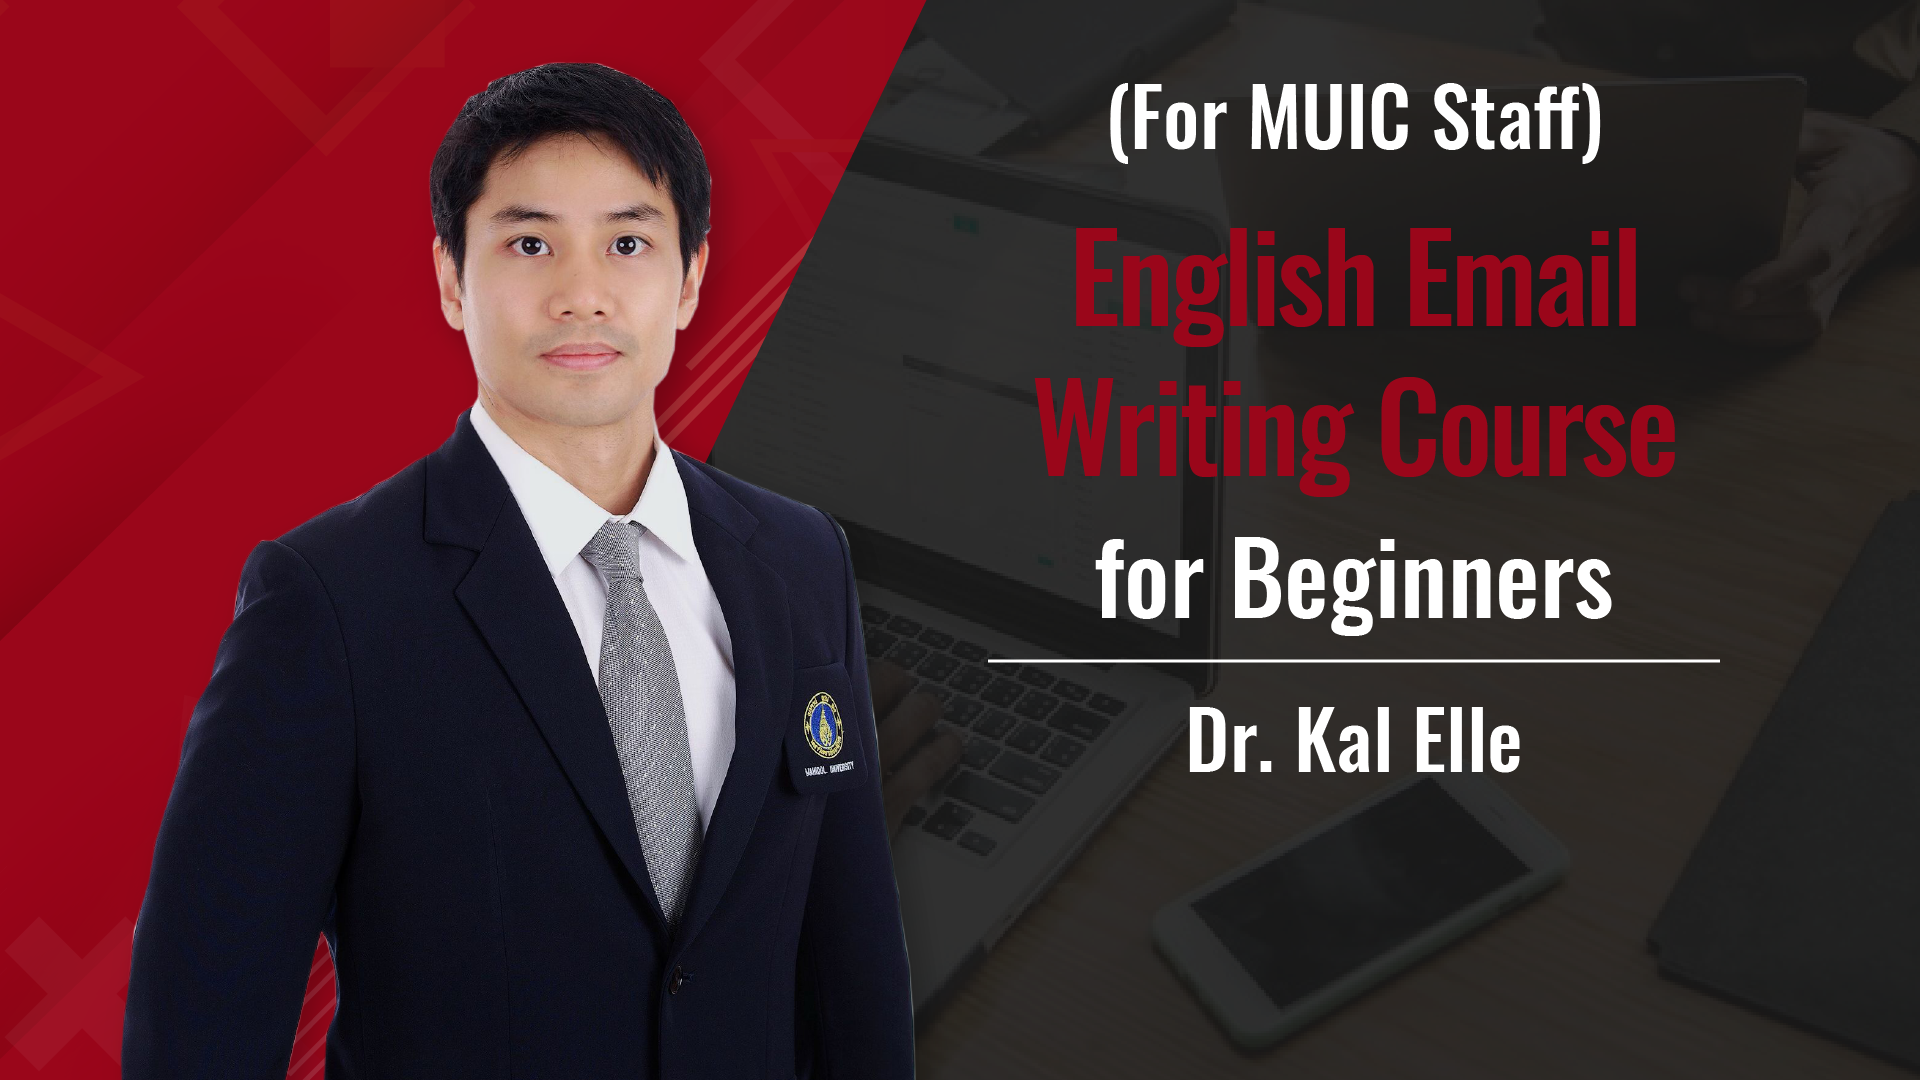 English Email Writing Course for Beginners 010